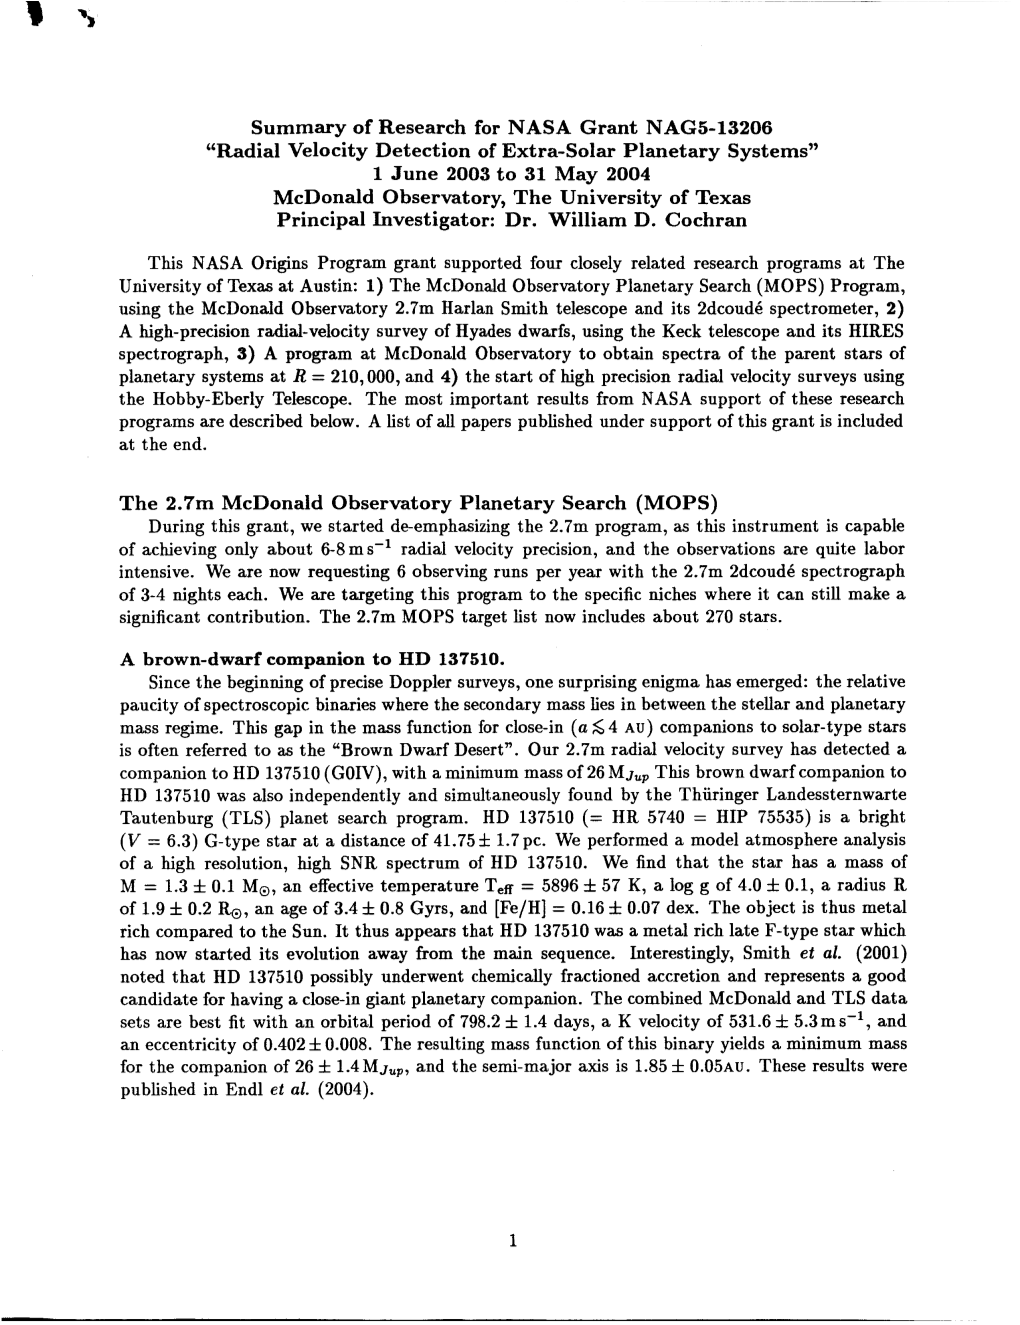 Radial Velocity Detection of Extra-Solar Planetary Systems” 1 June 2003 to 31 May 2004 Mcdonald Observatory, the University of Texas Principal Investigator: Dr